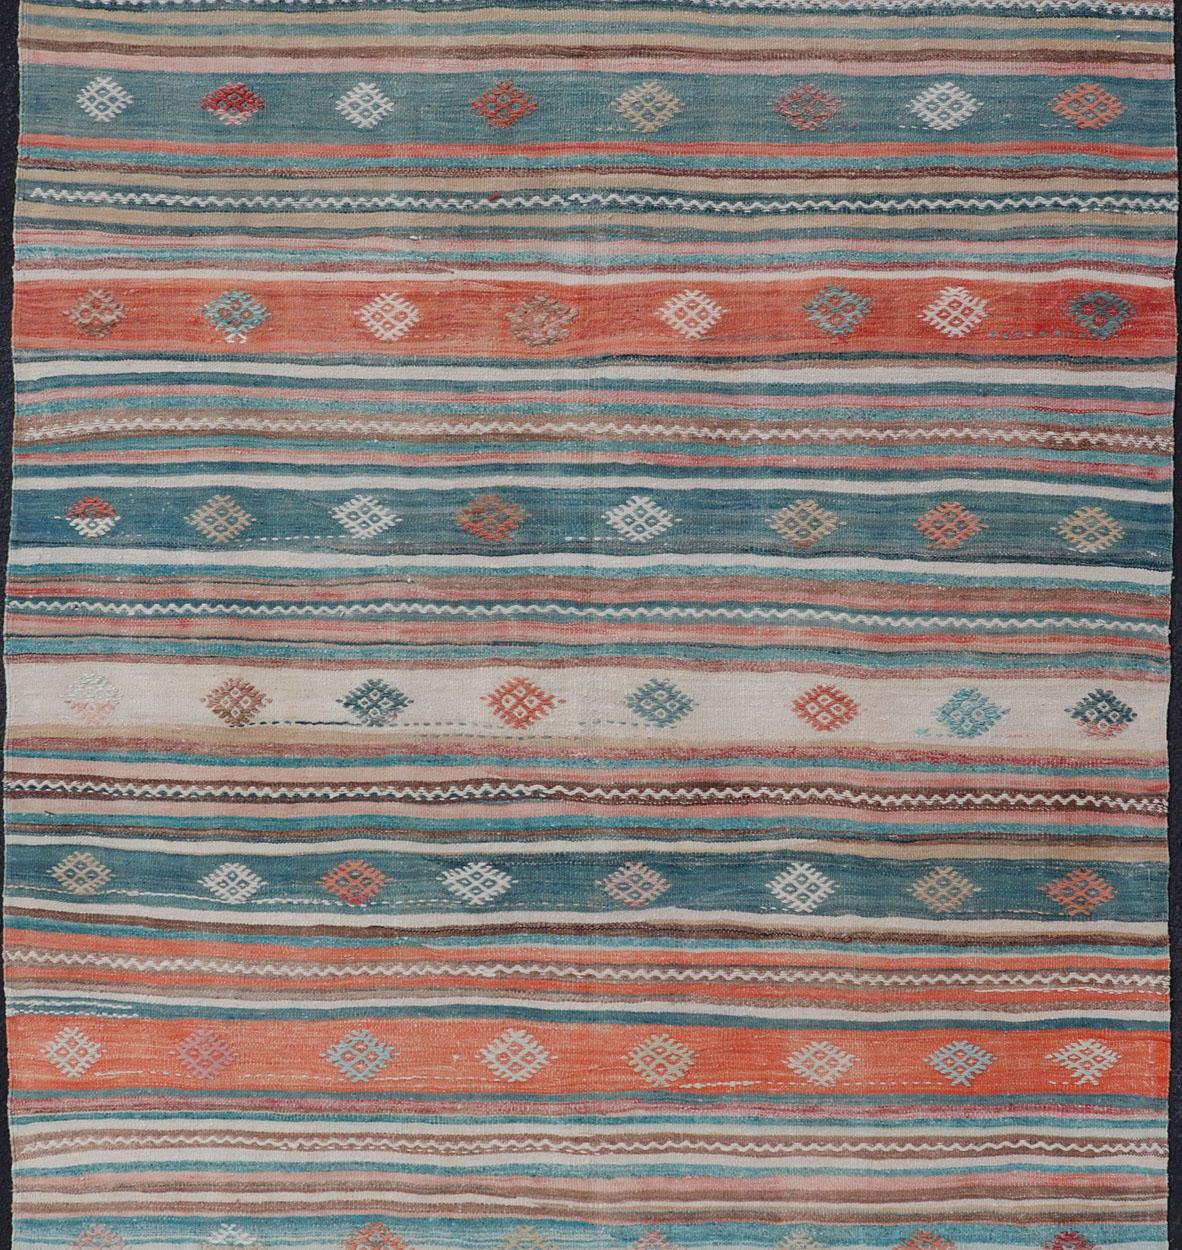 Colorful Vintage Turkish Embroidered Kilim with Stripes and Geometric Motifs For Sale 3